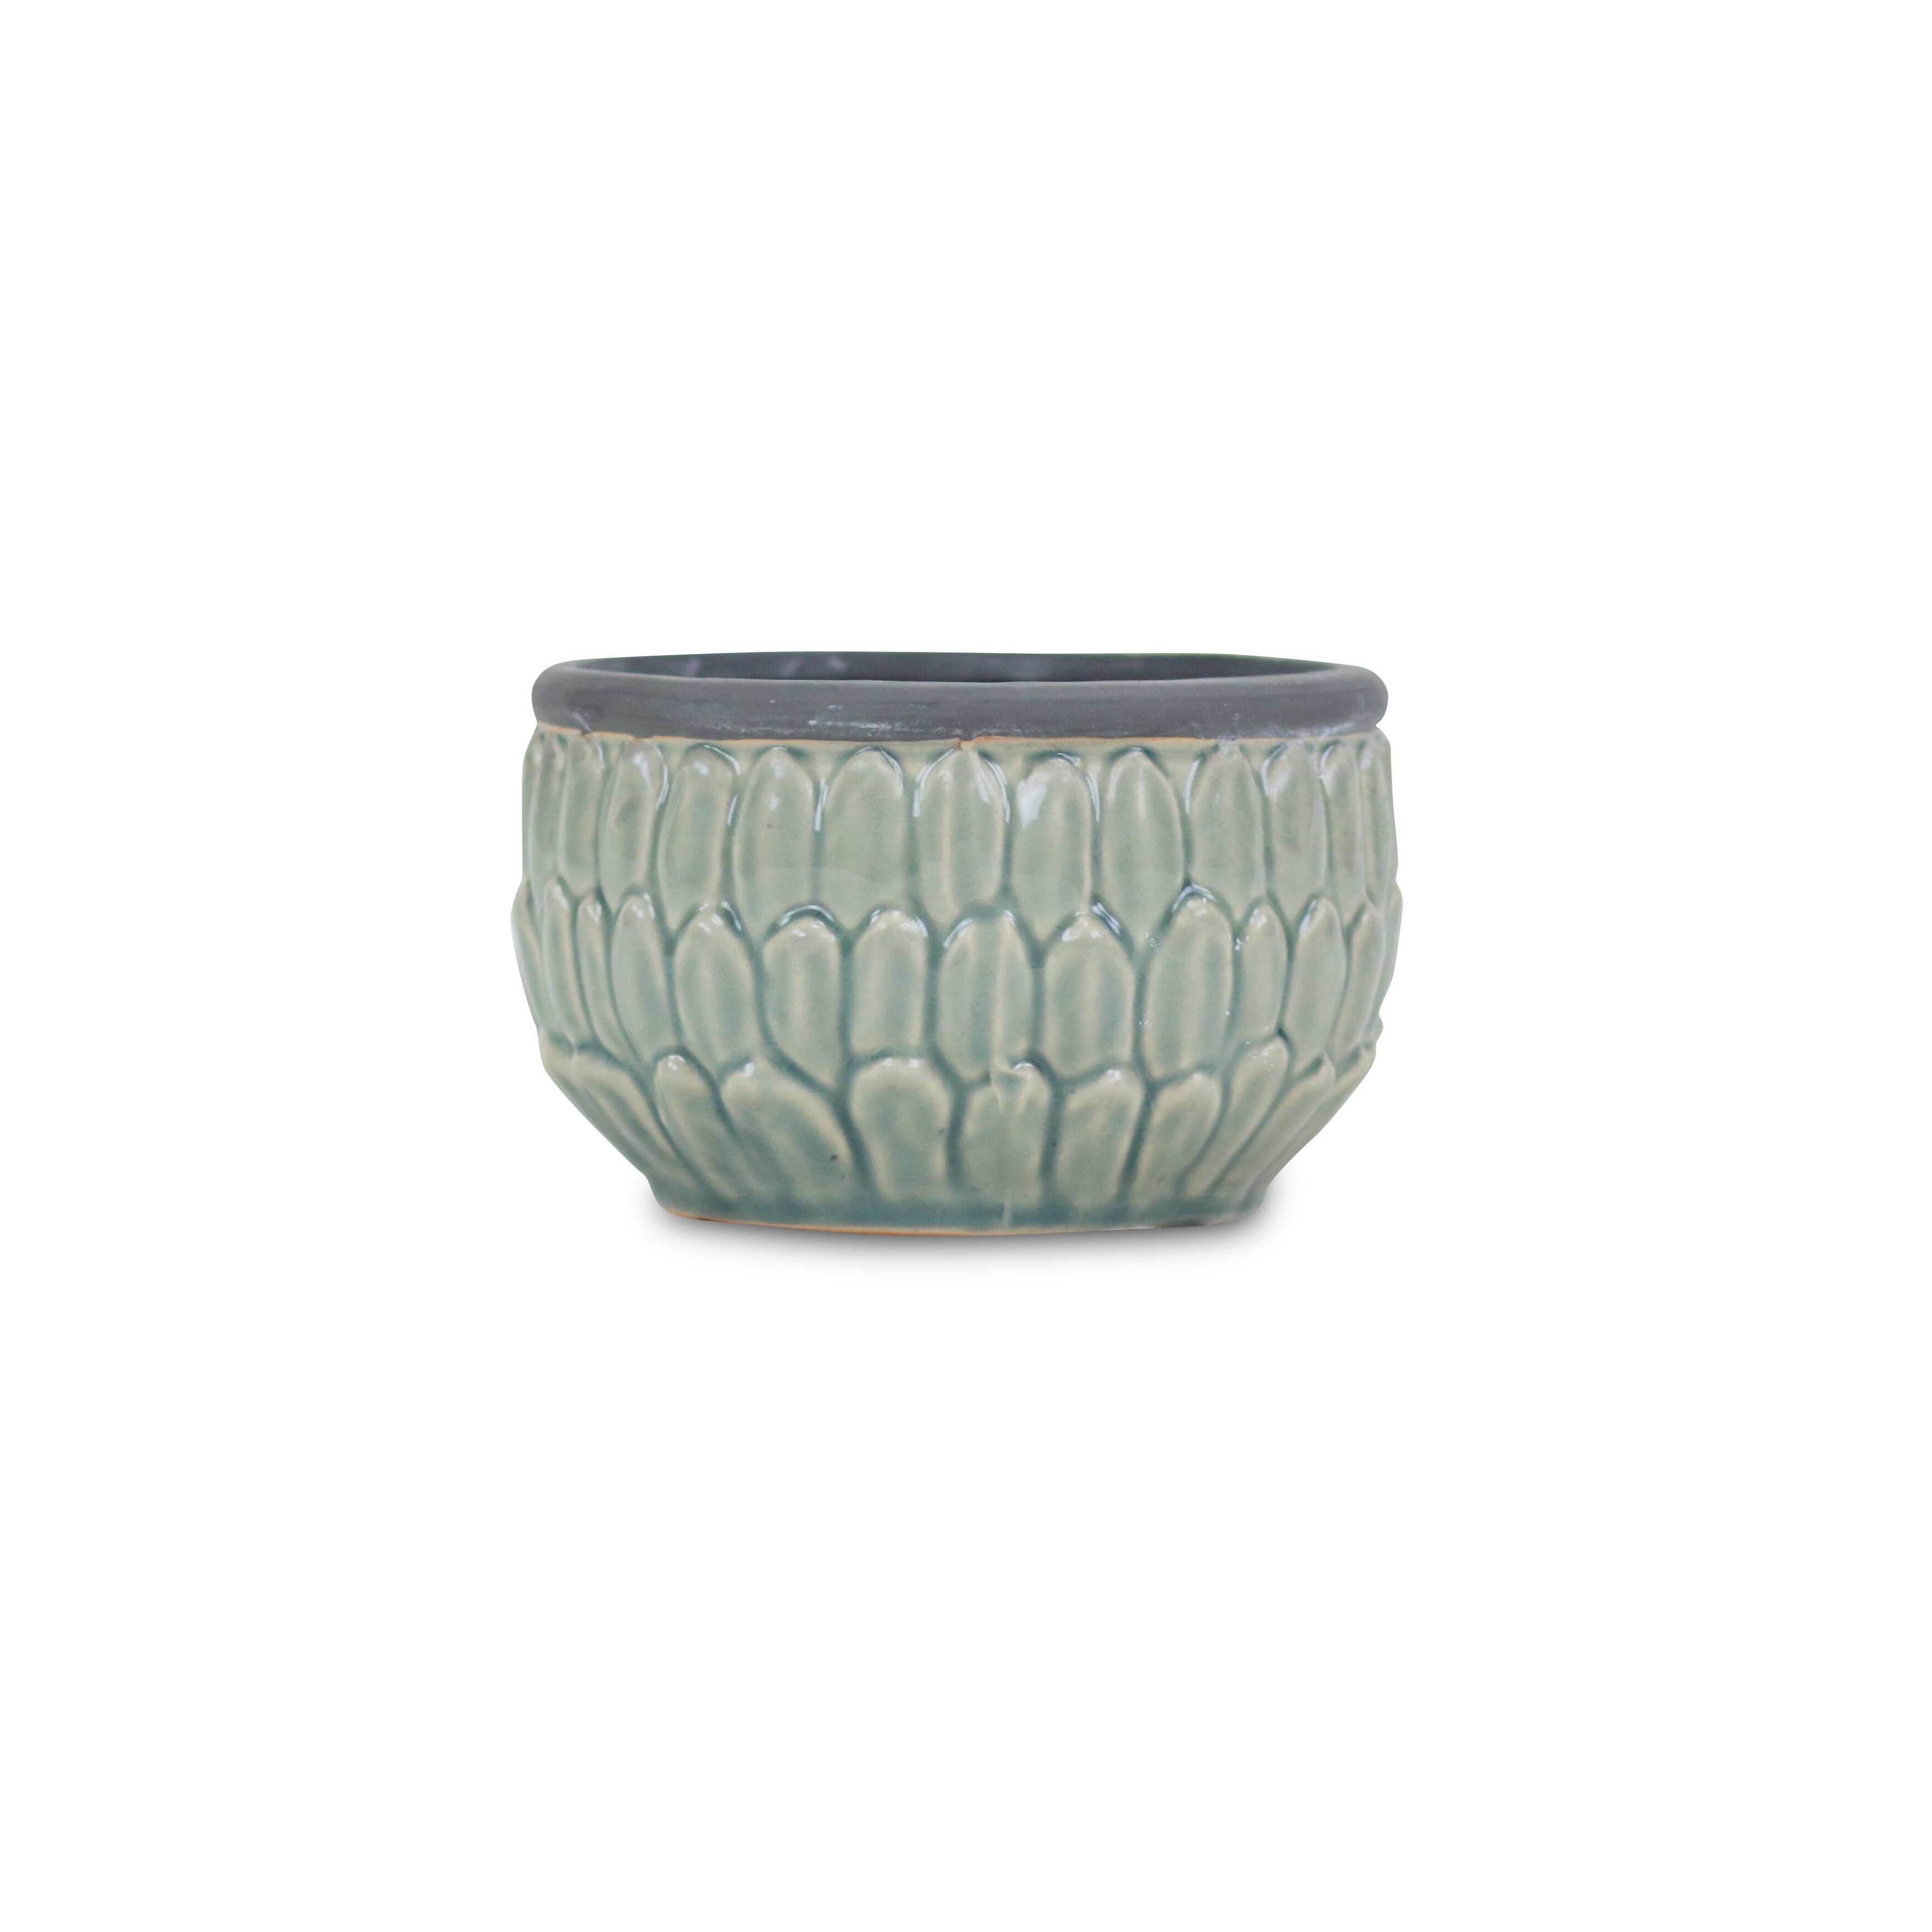 Blue Ceramic Round Pot with an Overlapping Leaf Pattern